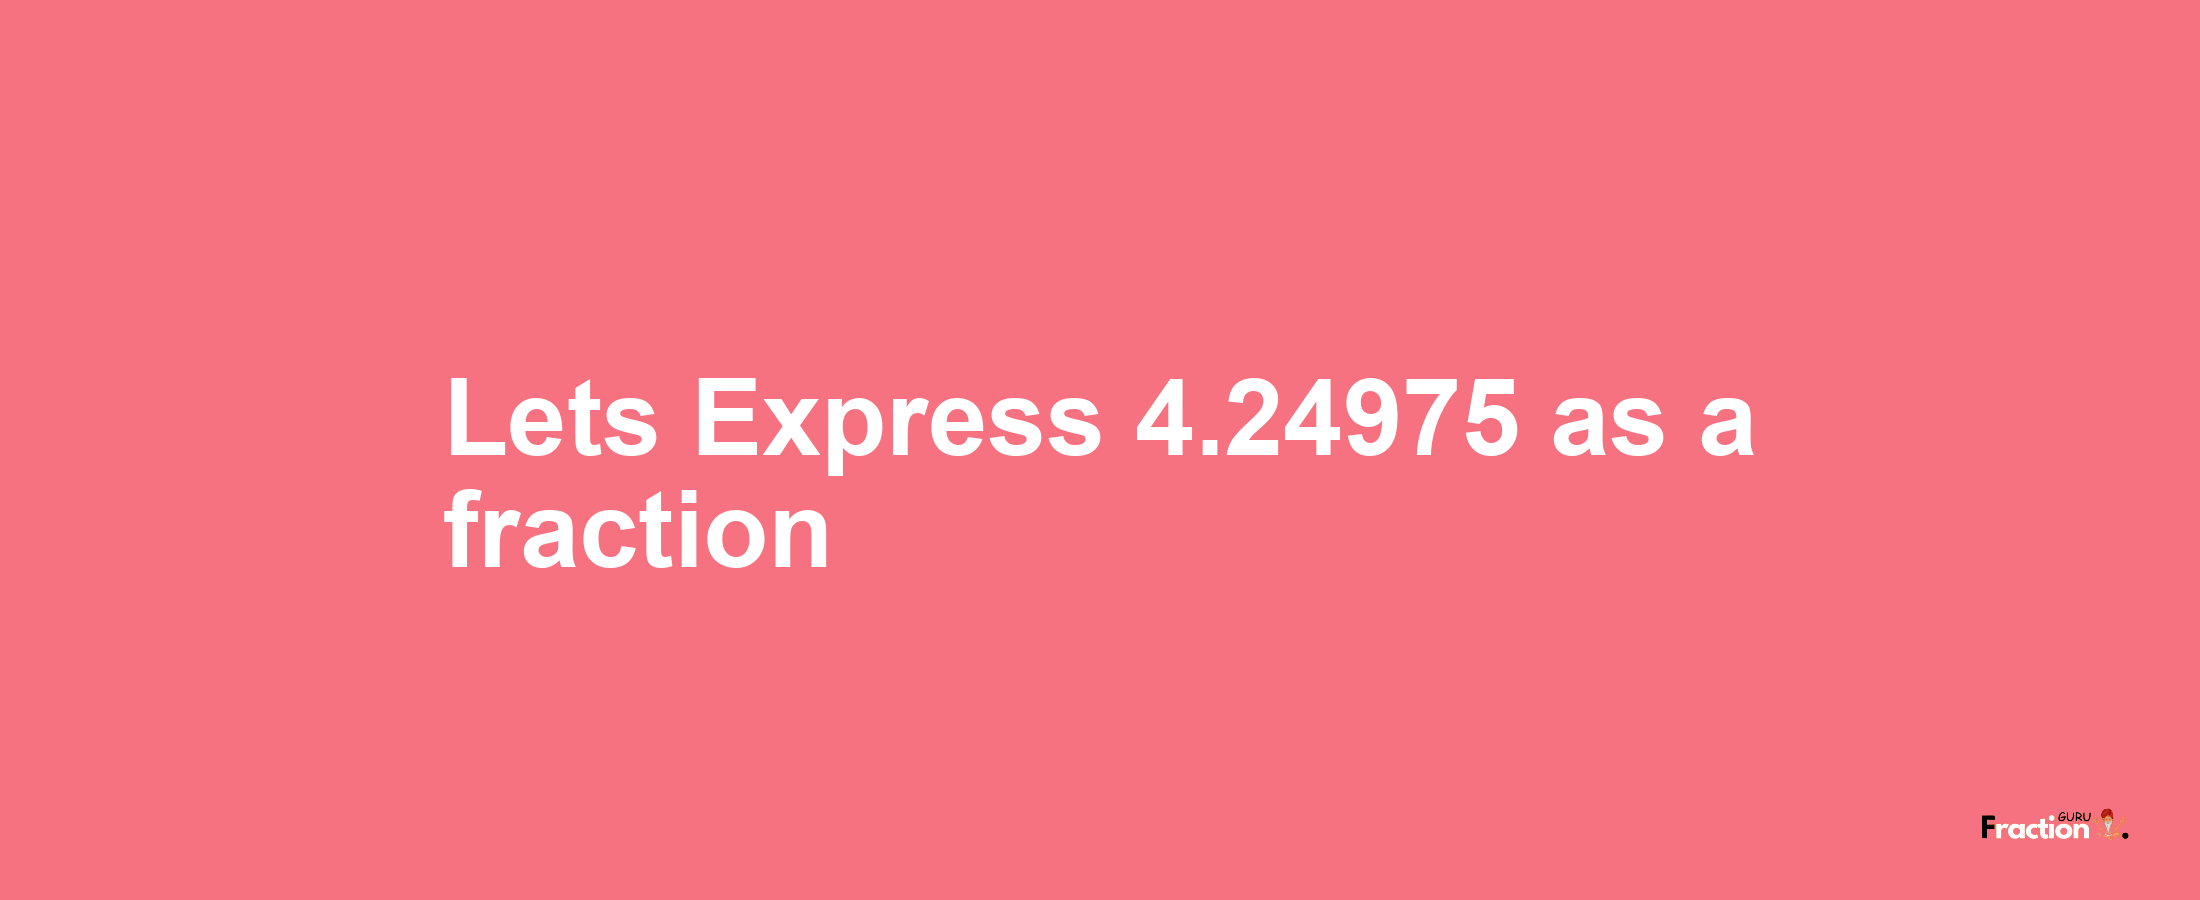 Lets Express 4.24975 as afraction